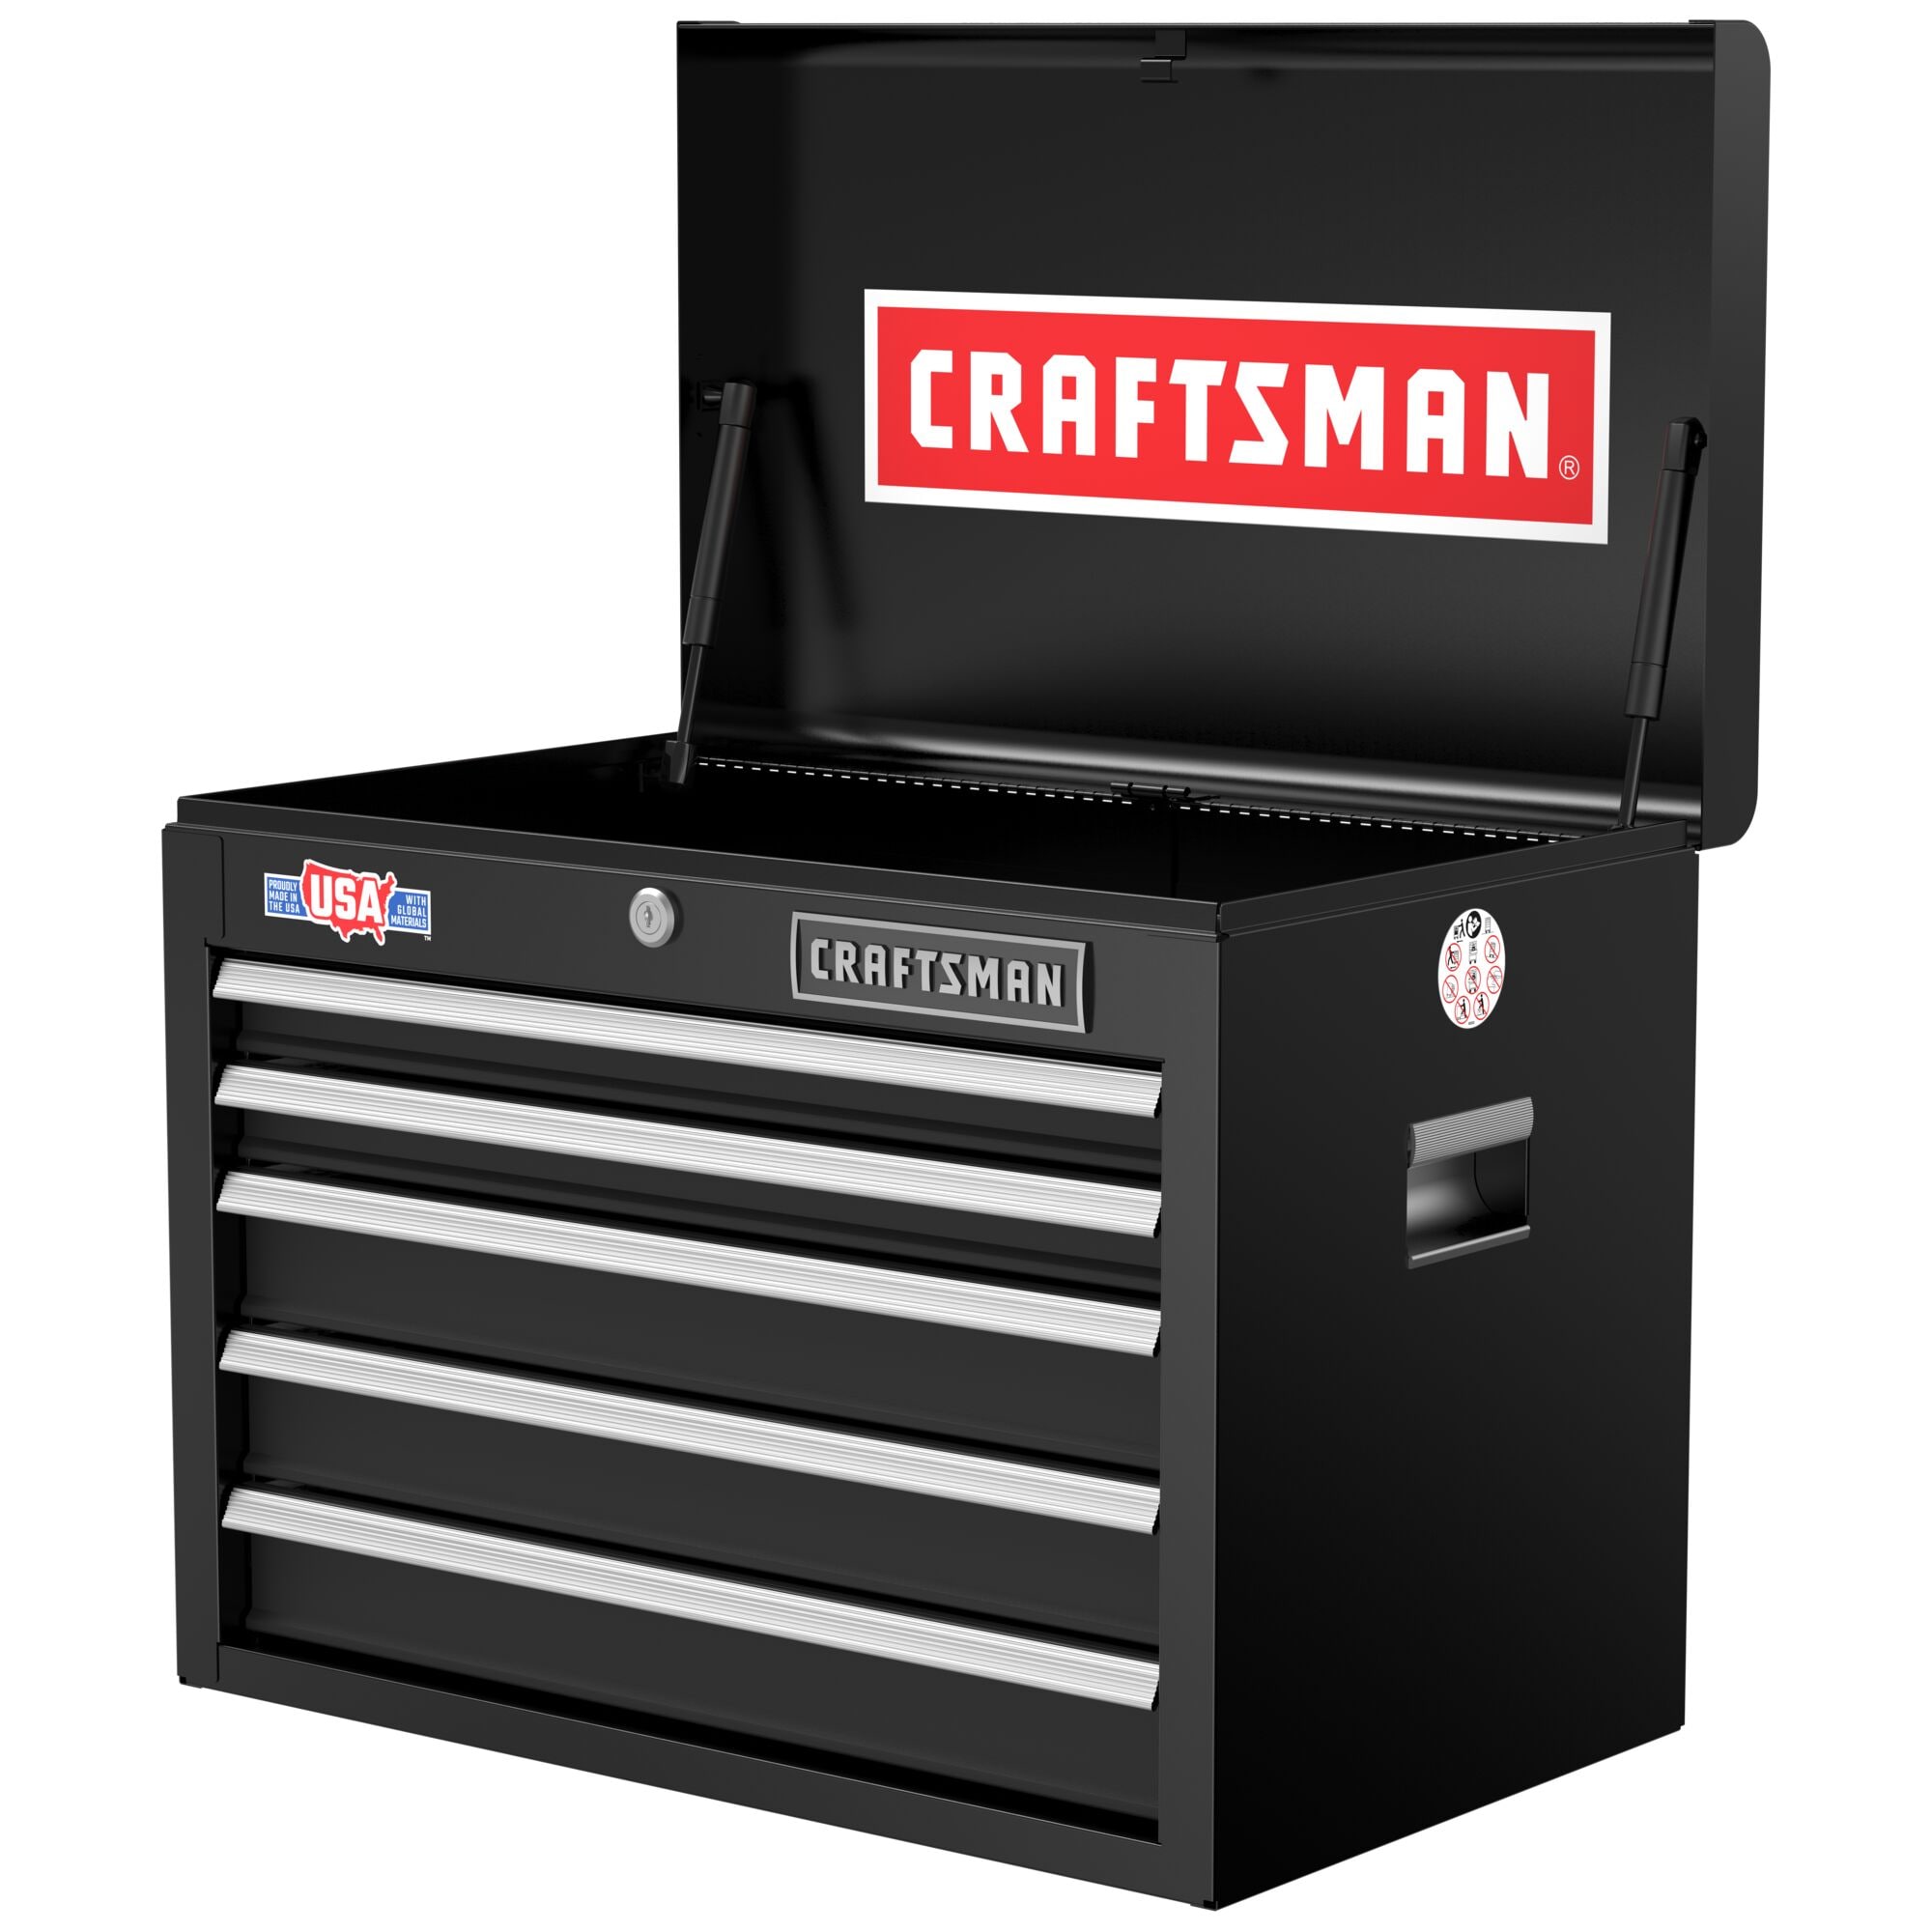 CRAFTSMAN 2000 Series 26-in W x 19.75-in H 5-Drawer Steel Tool Chest (Black)